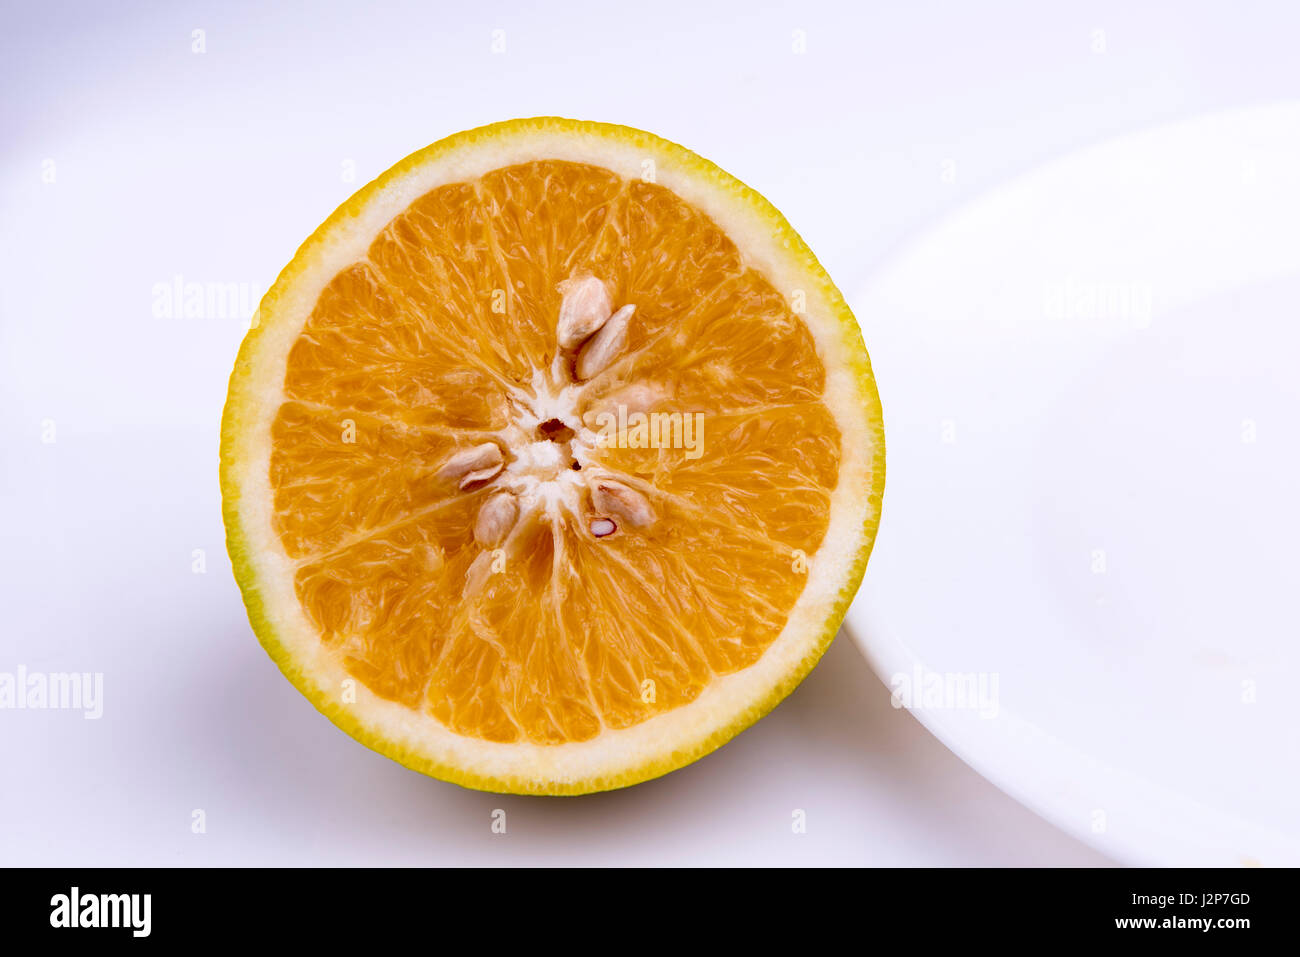 Mumbai / India  13 April 2017 Sweet lemon is almost exclusively served as juice  and is the most common available citrus juice in India, mumbai   indi Stock Photo